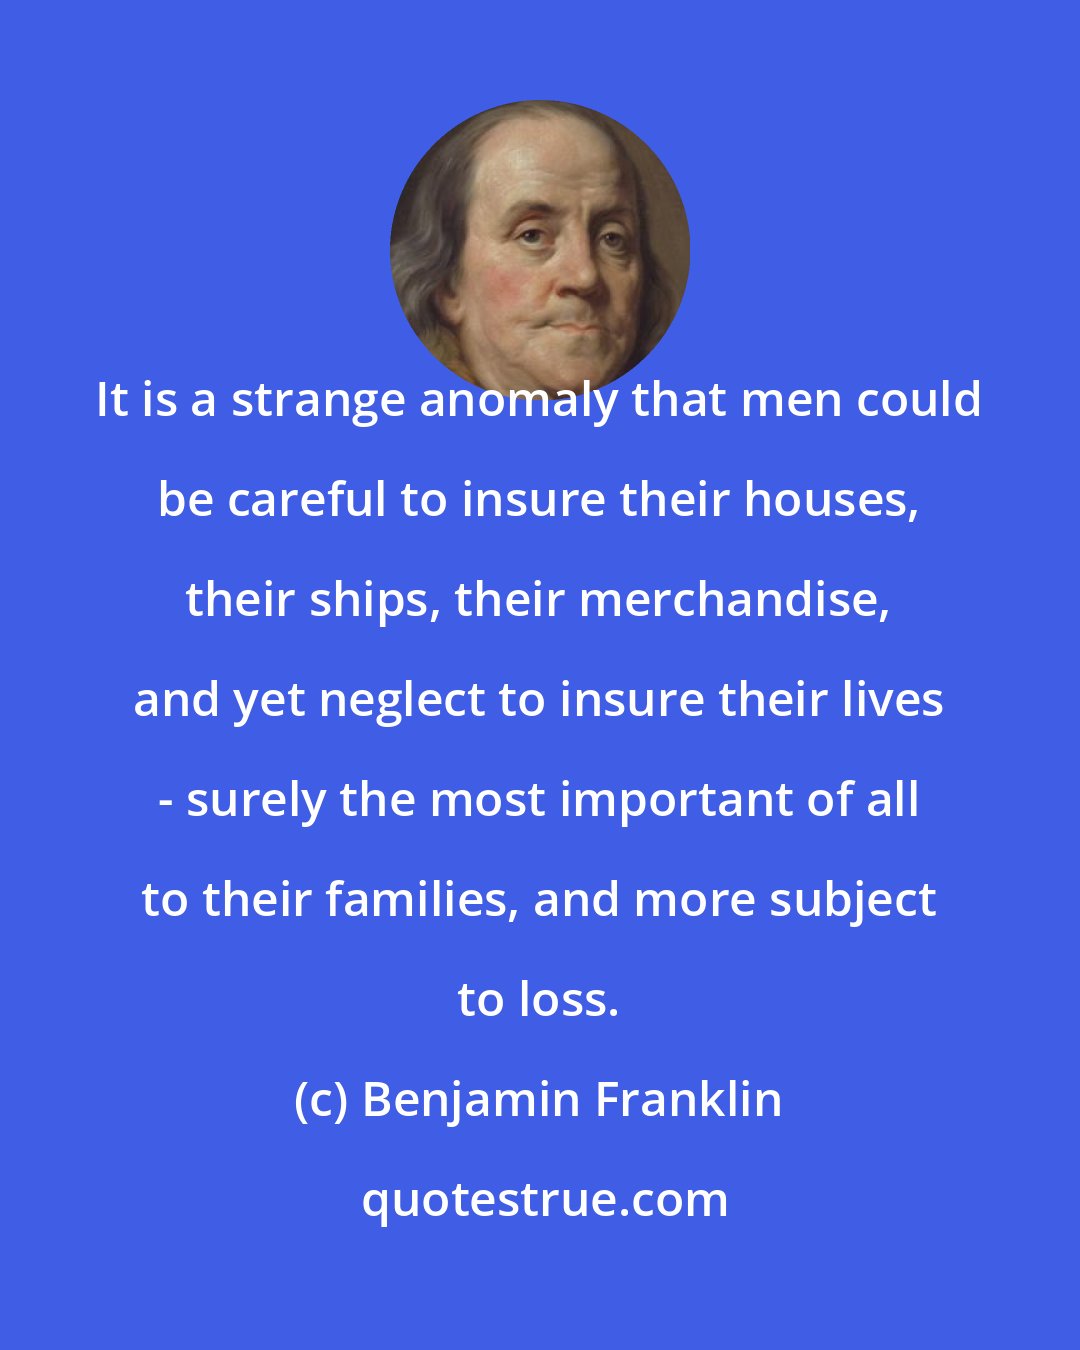 Benjamin Franklin: It is a strange anomaly that men could be careful to insure their houses, their ships, their merchandise, and yet neglect to insure their lives - surely the most important of all to their families, and more subject to loss.